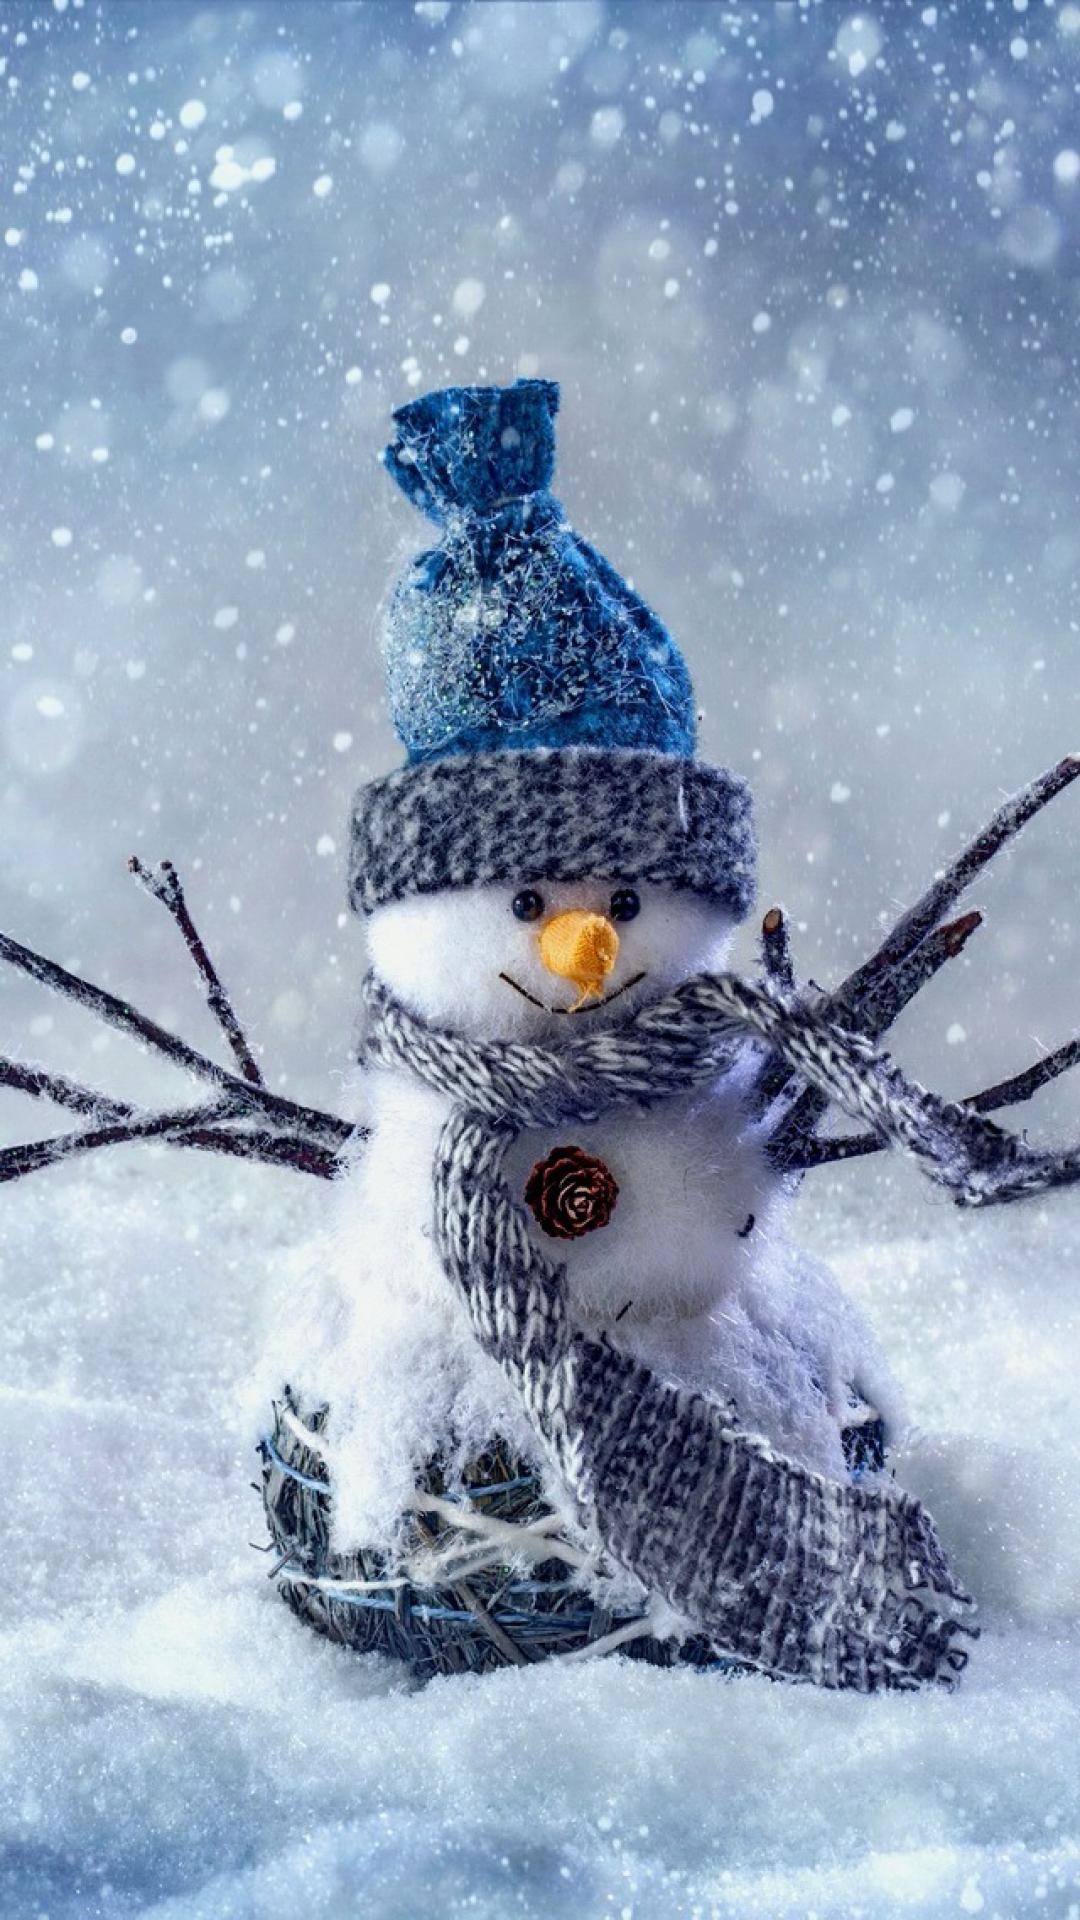 Christmas Snowman New Year #iPhone #6 #plus #wallpaper Merry Christmas!